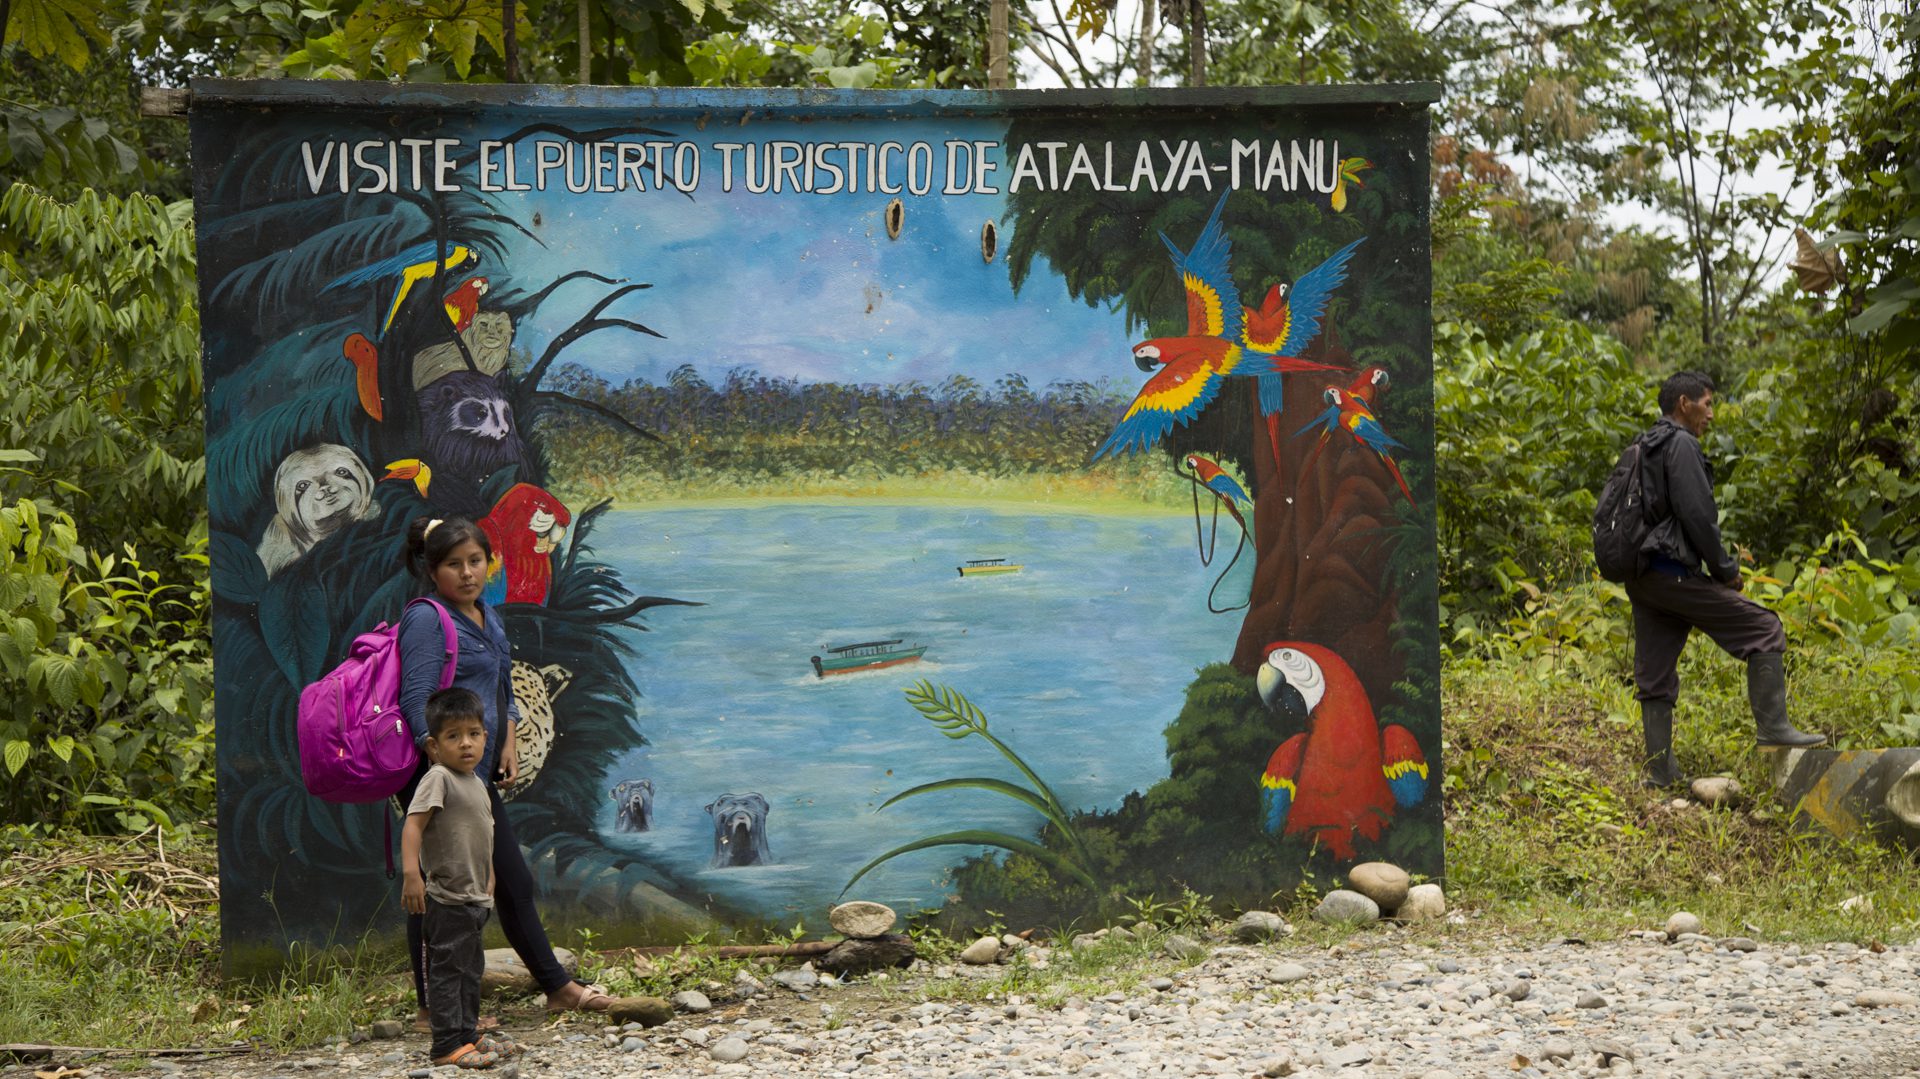 Mural depicting Manu's natural richness at a point where locals wait for ground transportation | Responsible Travel Peru